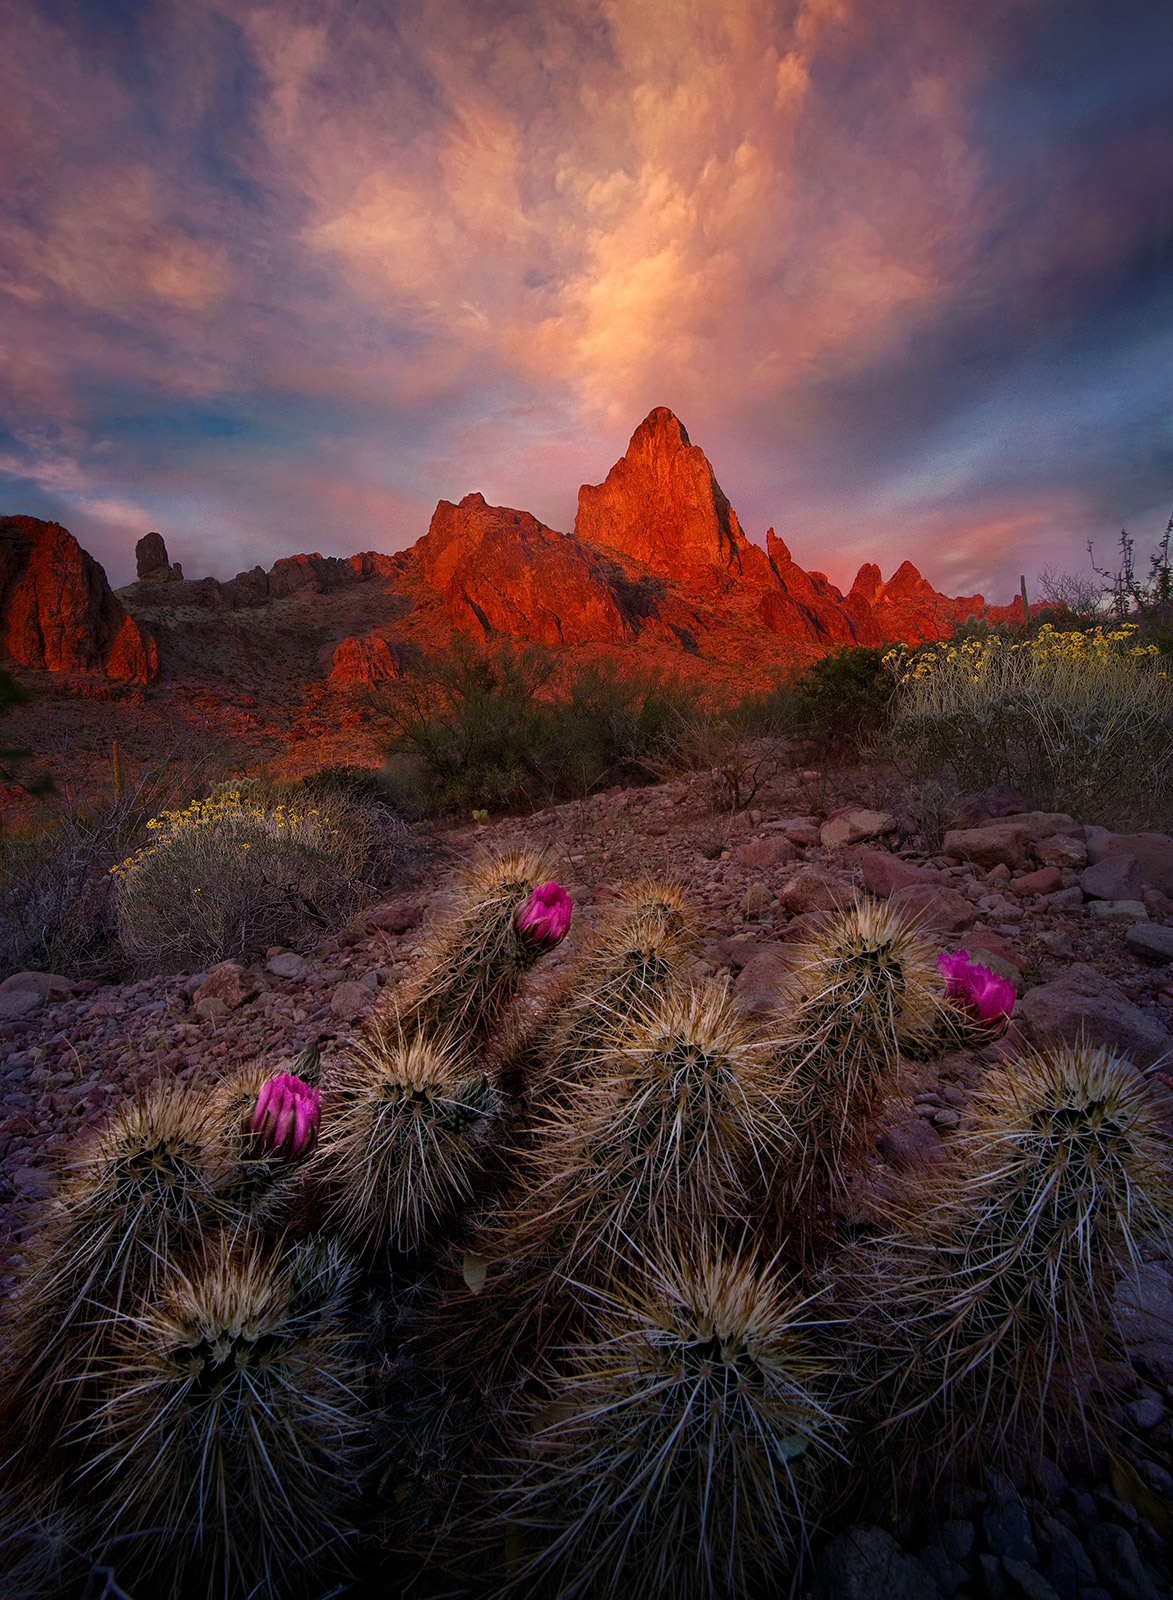 One of the best shows of light at sunset I have ever seen over blooming Cactus and Brittlebrush in Arizona's Kofa Mountains.